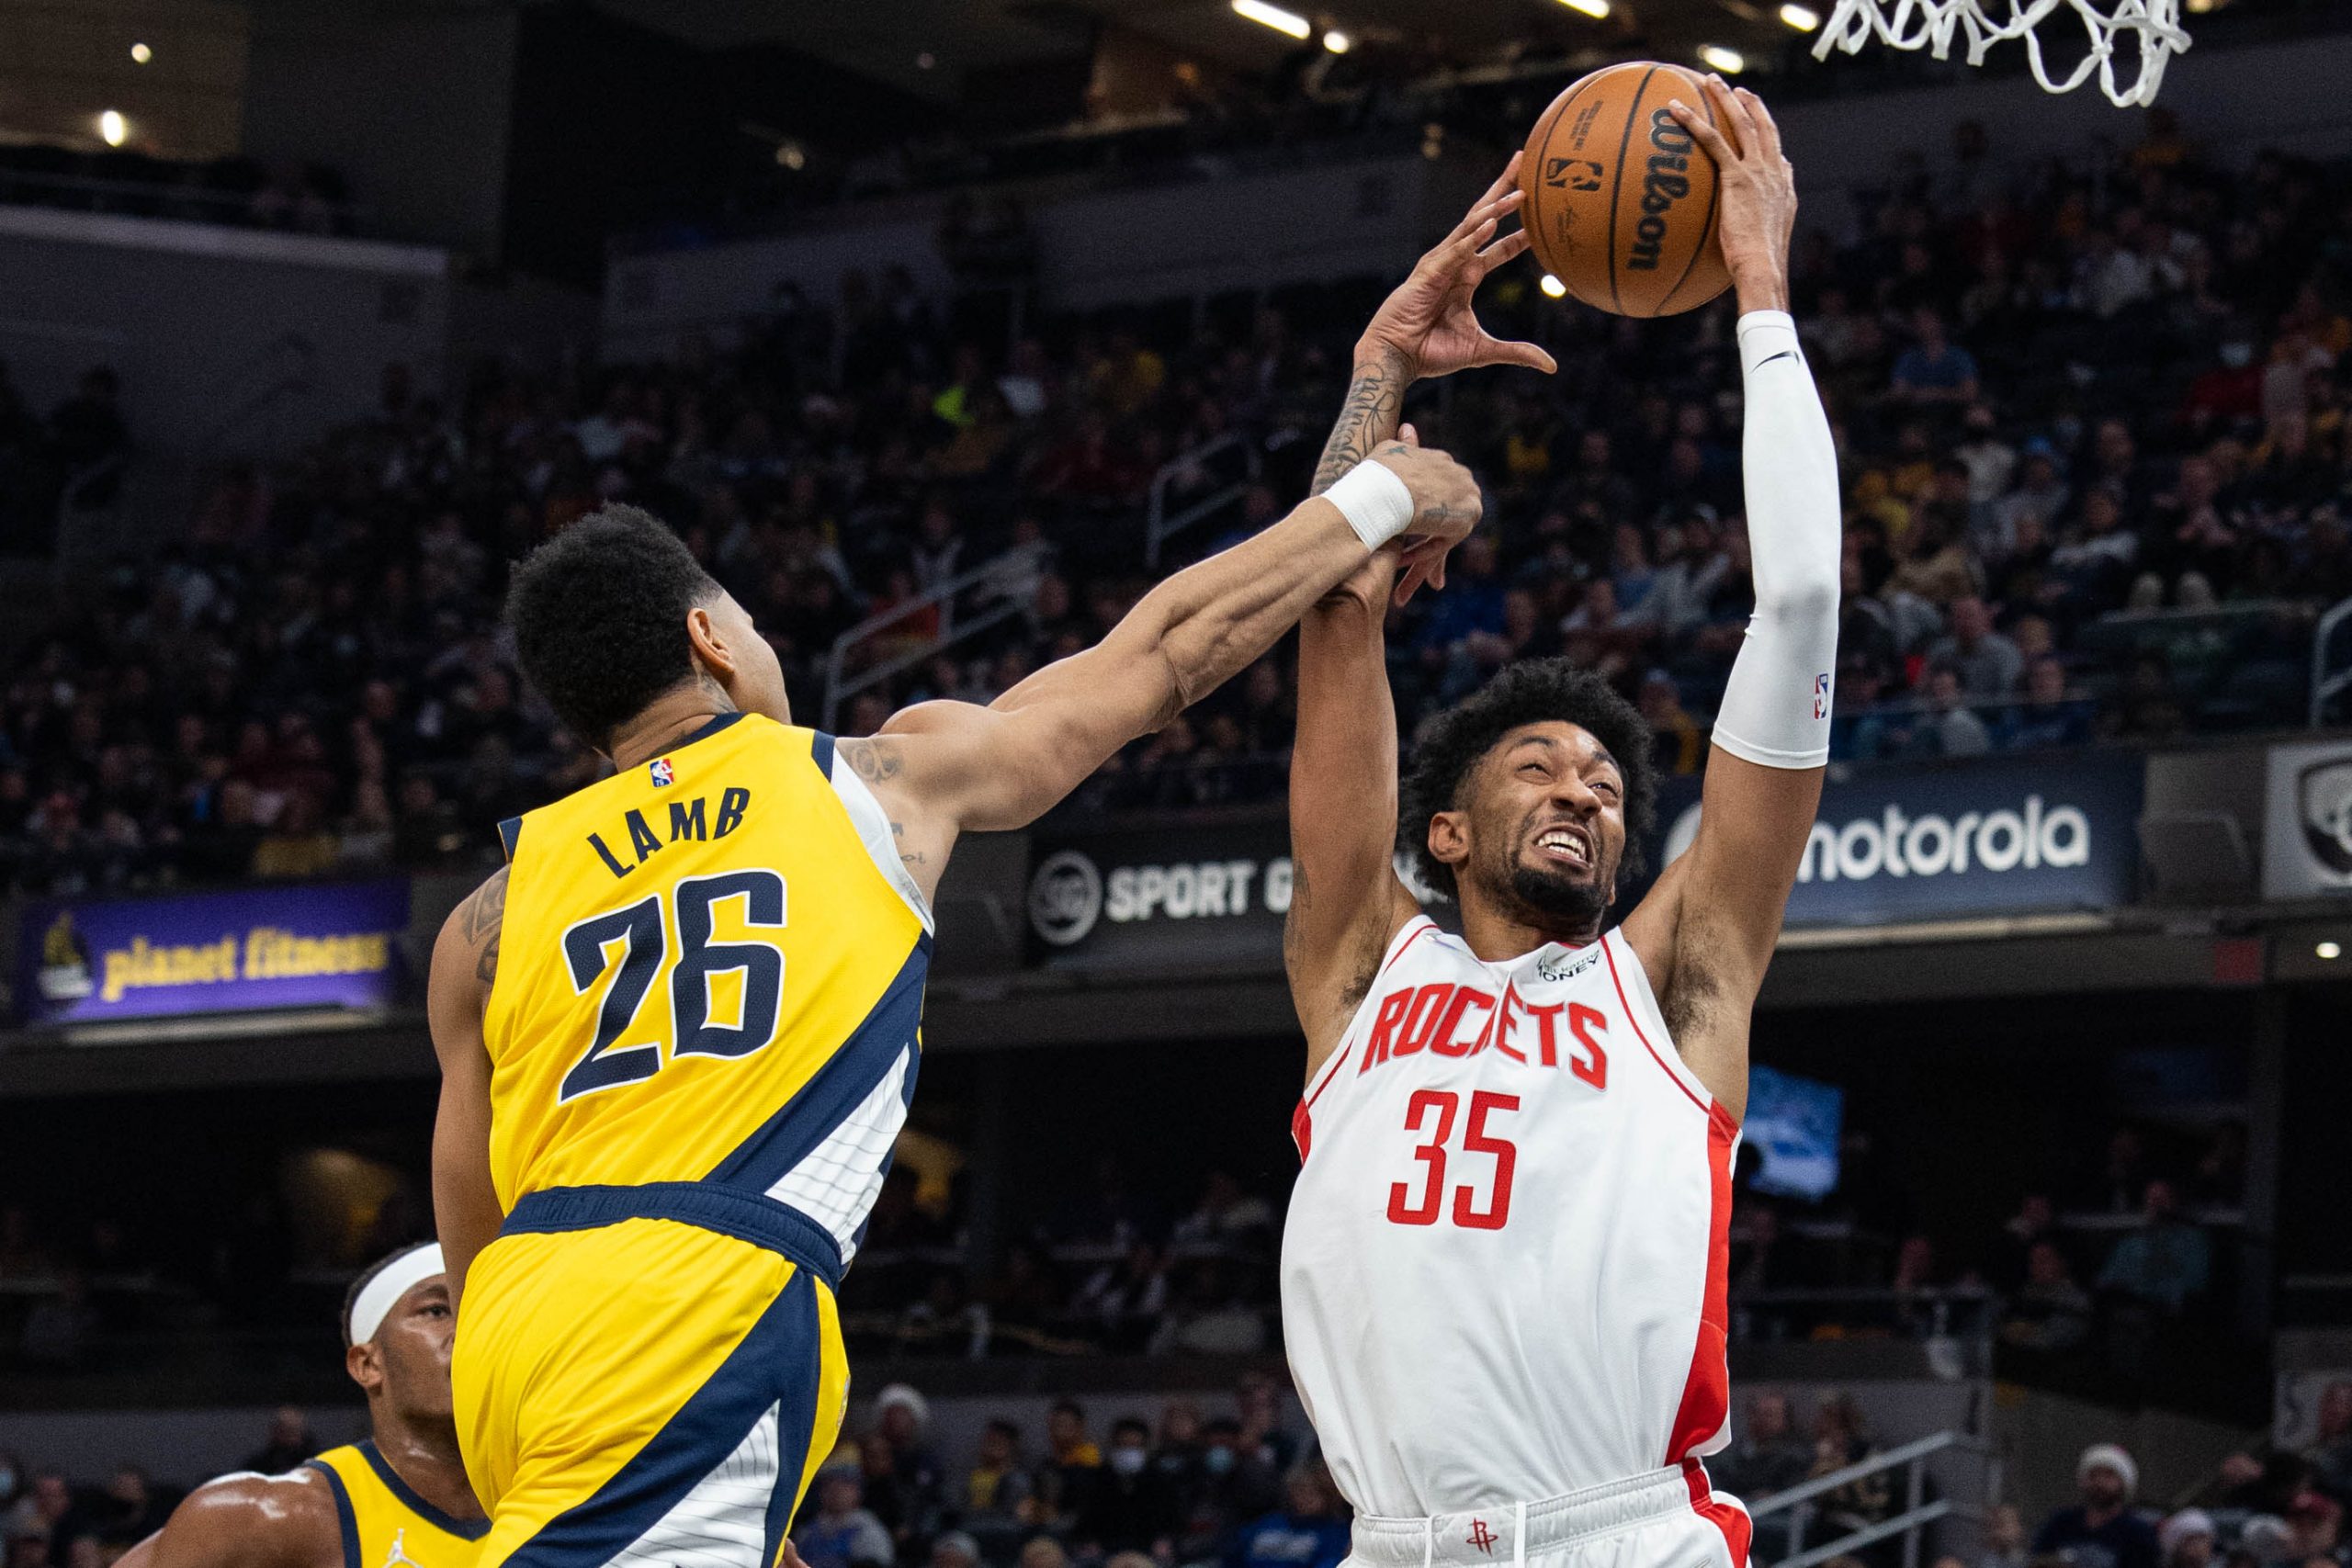 Houston Rockets center Christian Wood (35) is fouled by Indiana Pacers guard Jeremy Lamb (26) in the first half at Gainbridge Fieldhouse.